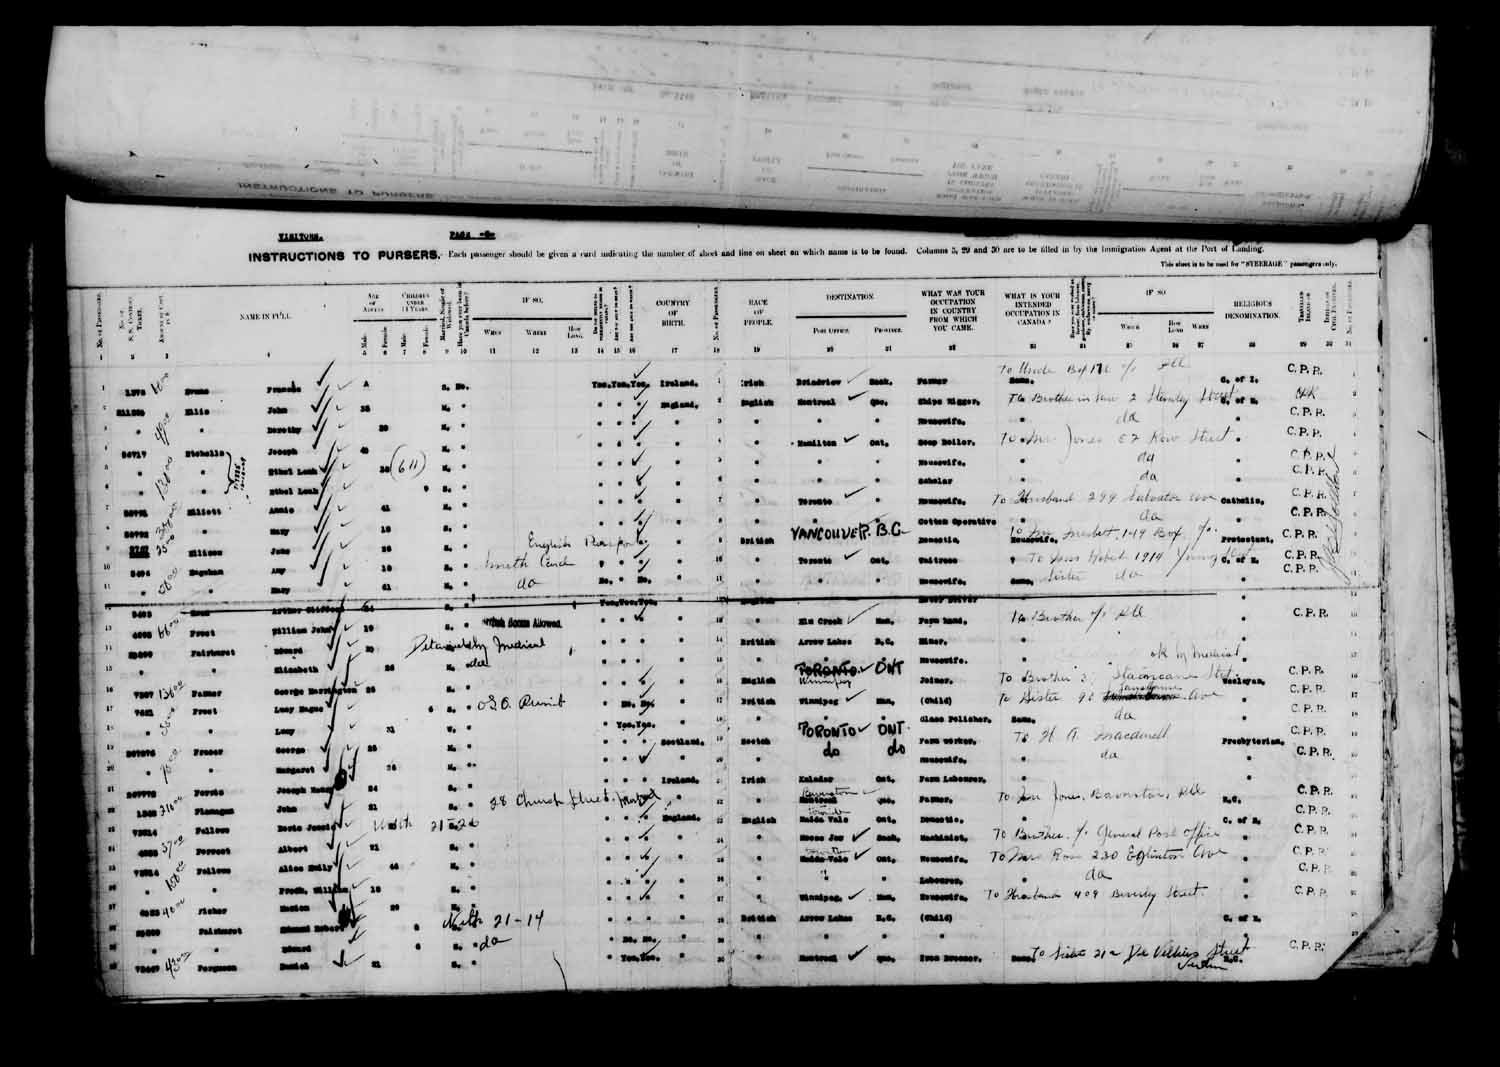 Digitized page of Passenger Lists for Image No.: e003610648